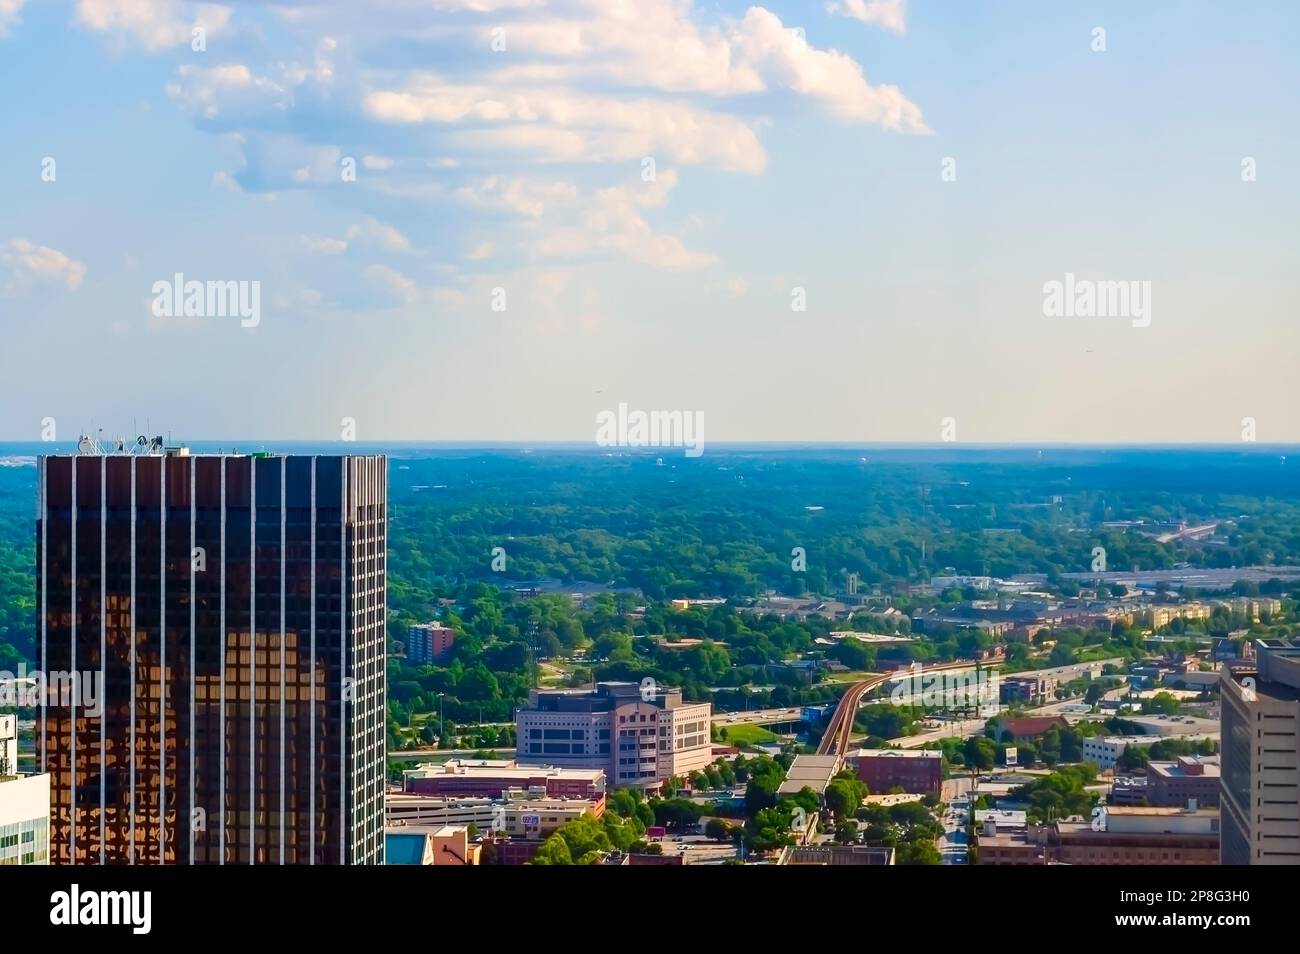 Atlanta landscape with the State of Georgia Building, located in downtown Atlanta, GA, in the foreground as seen from the Westin Peachtree Plaza Hotel. Stock Photo